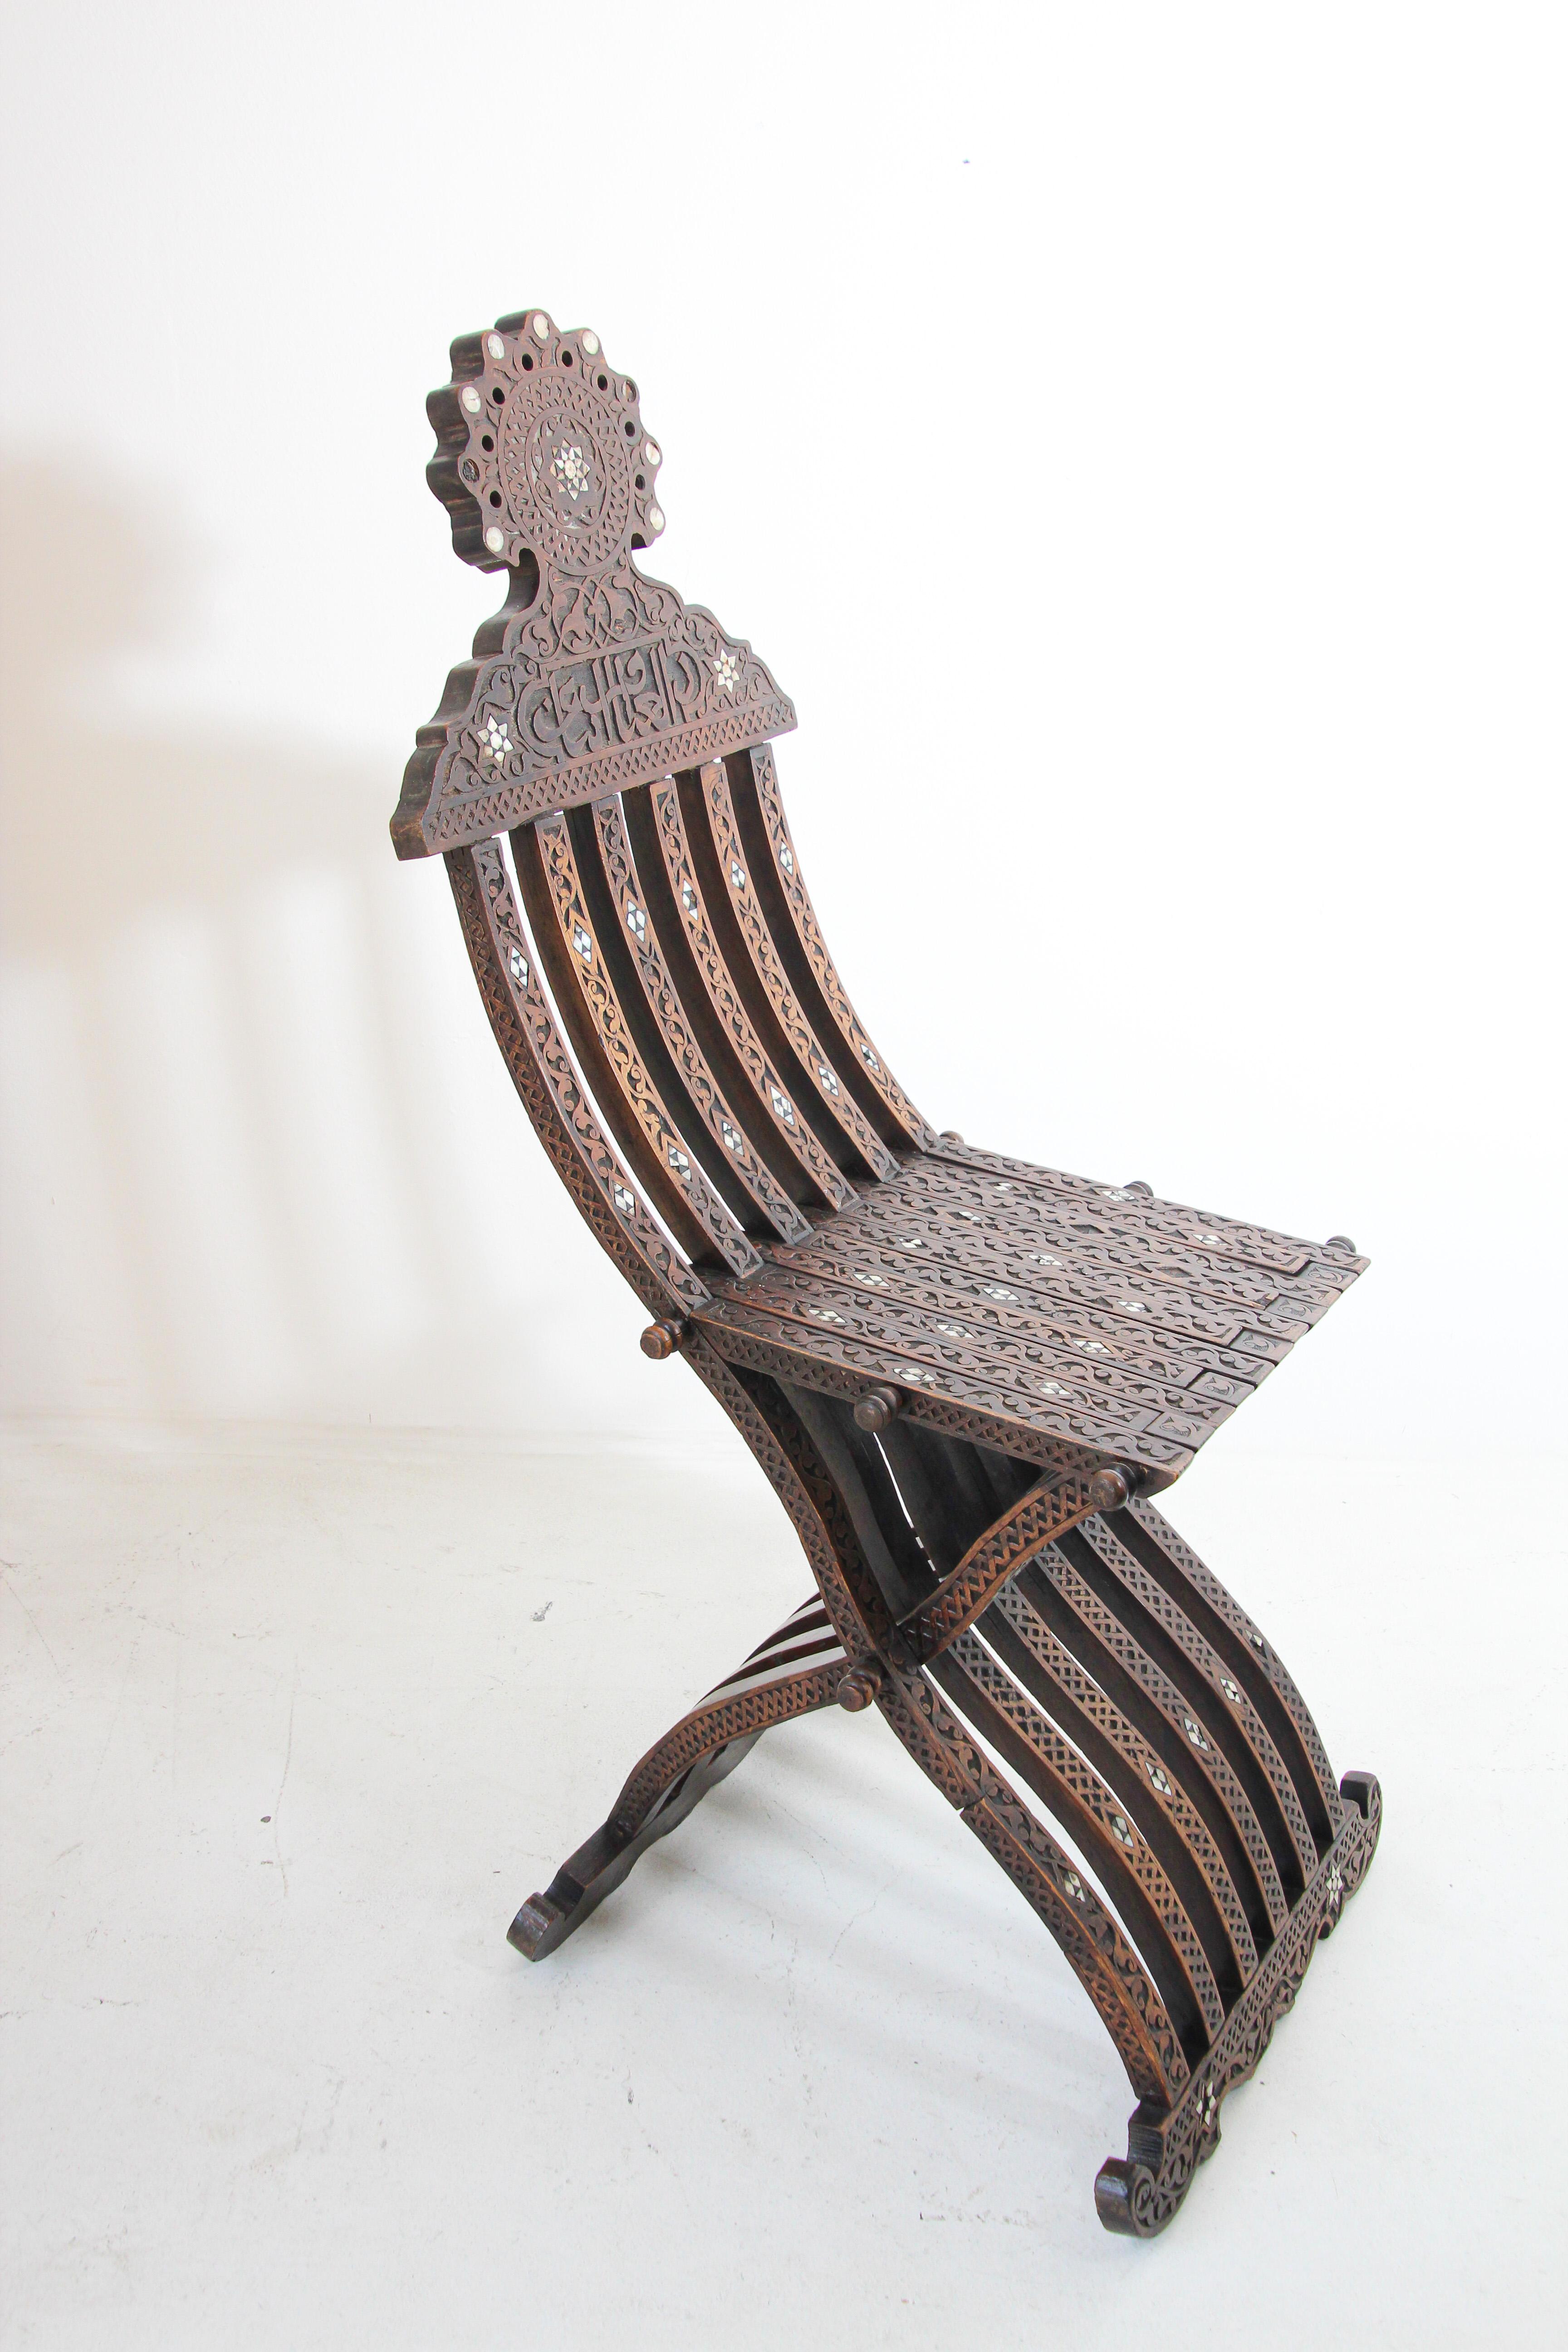 Antique Middle Eastern Egyptian Moorish walnut wood folding chair with intricate foliate carving and mother of pearl, shell inlays.
Arabian Syrian style folding chair inlaid with mother of pearl stars designs, hand carved with Arabic calligraphy